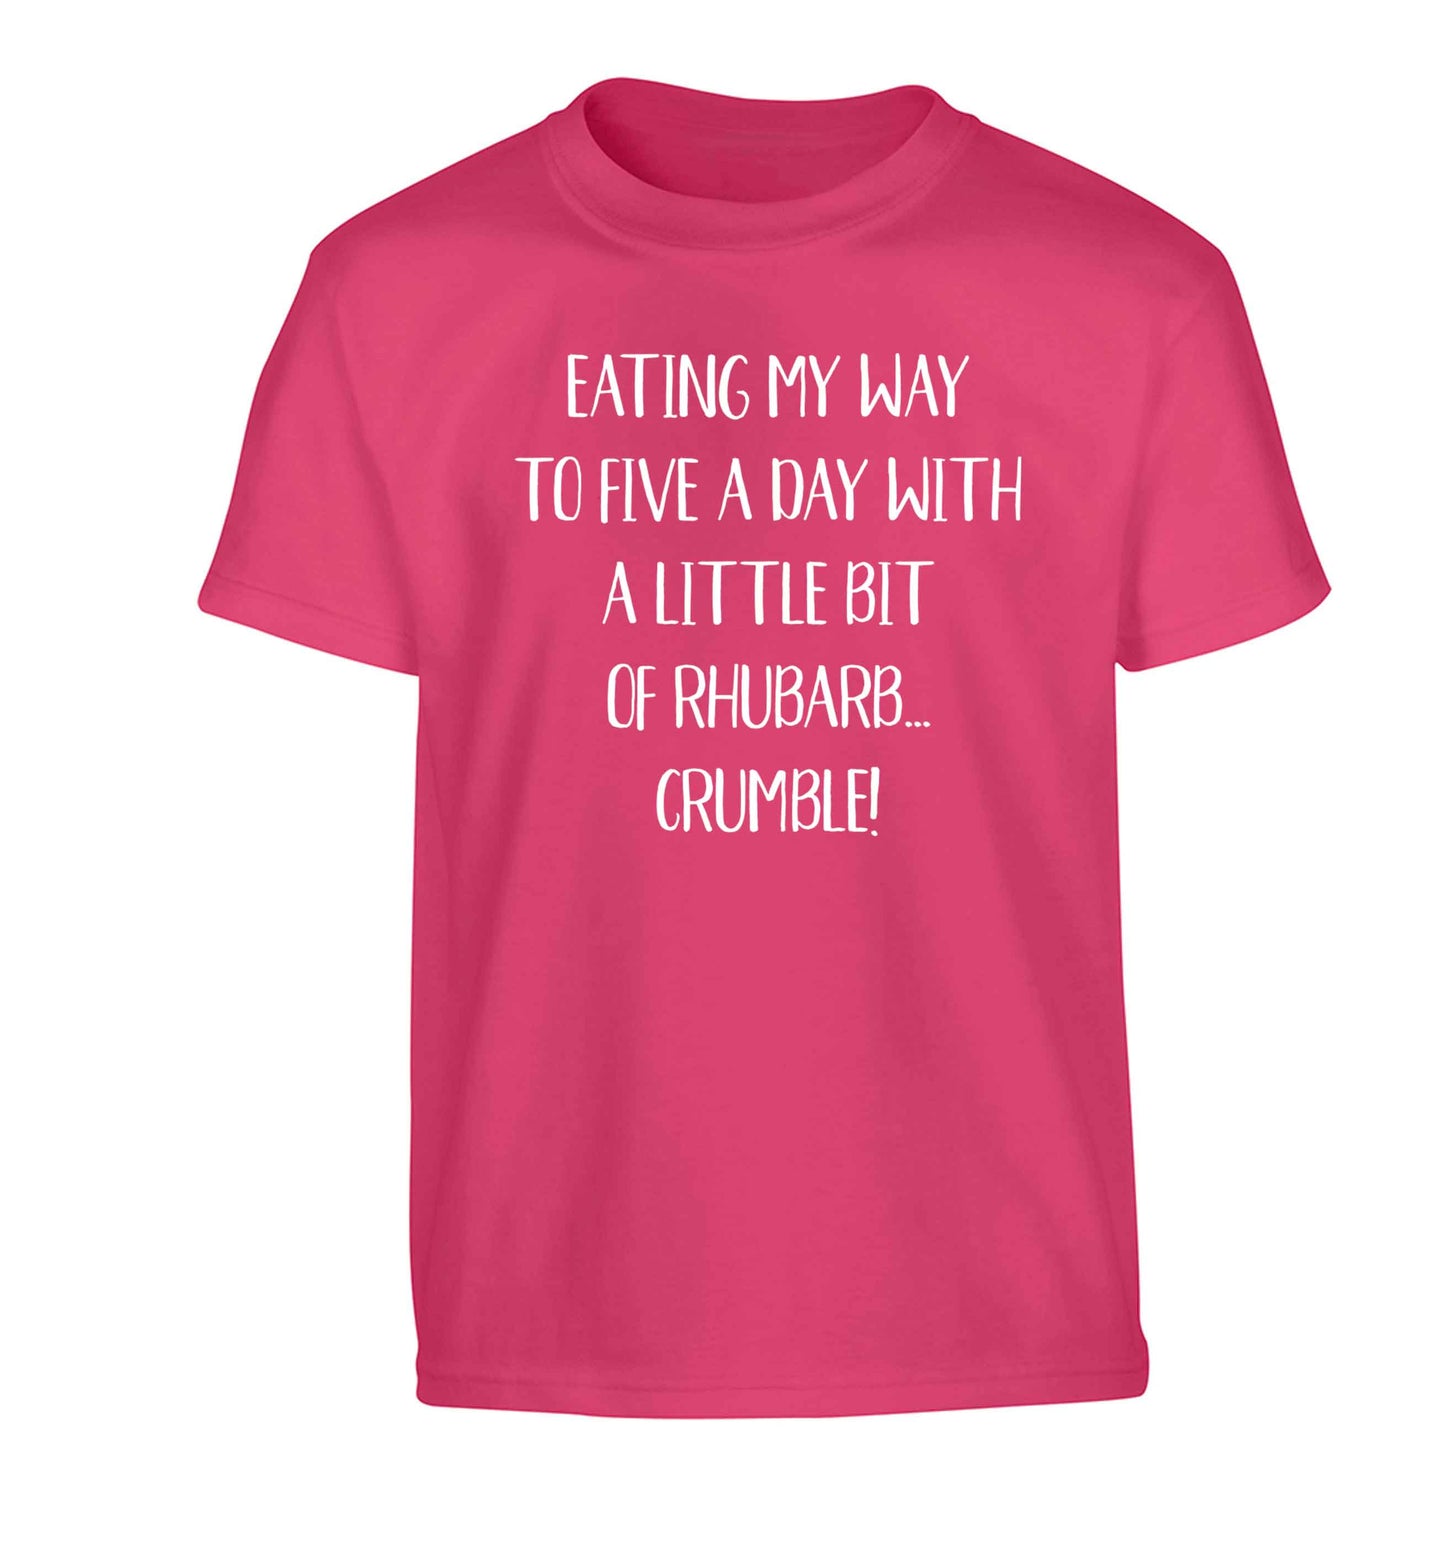 Eating my way to five a day with a little bit of rhubarb crumble Children's pink Tshirt 12-13 Years